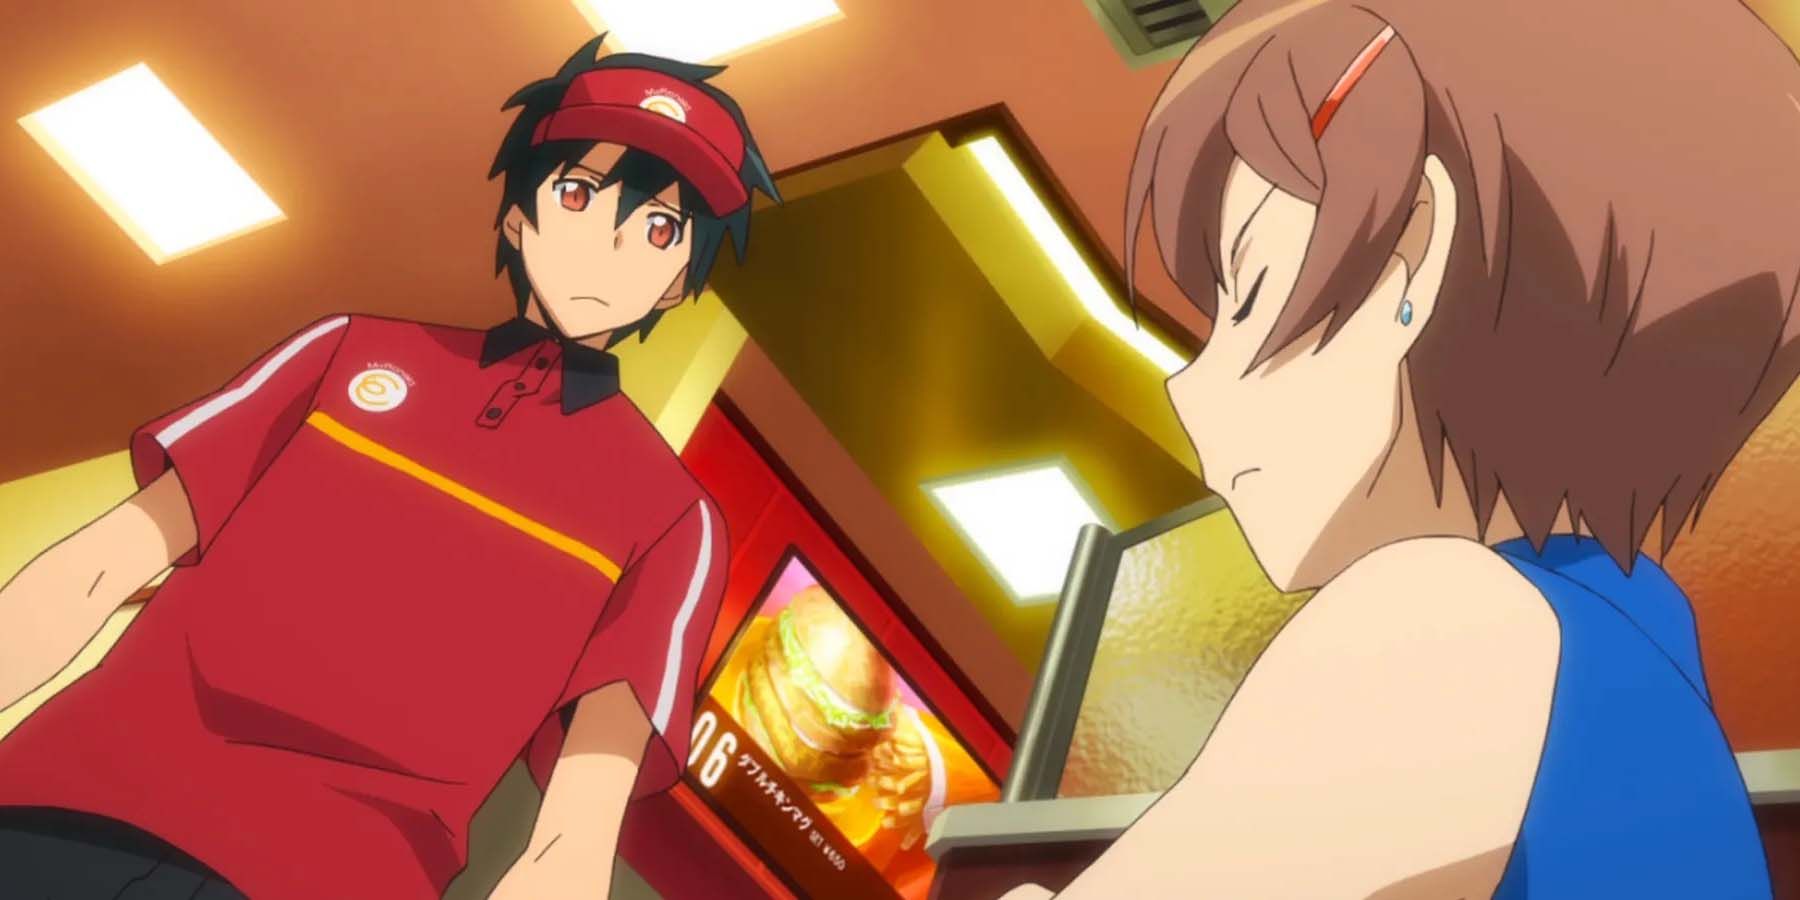 The Devil Is A Part-Timer anime